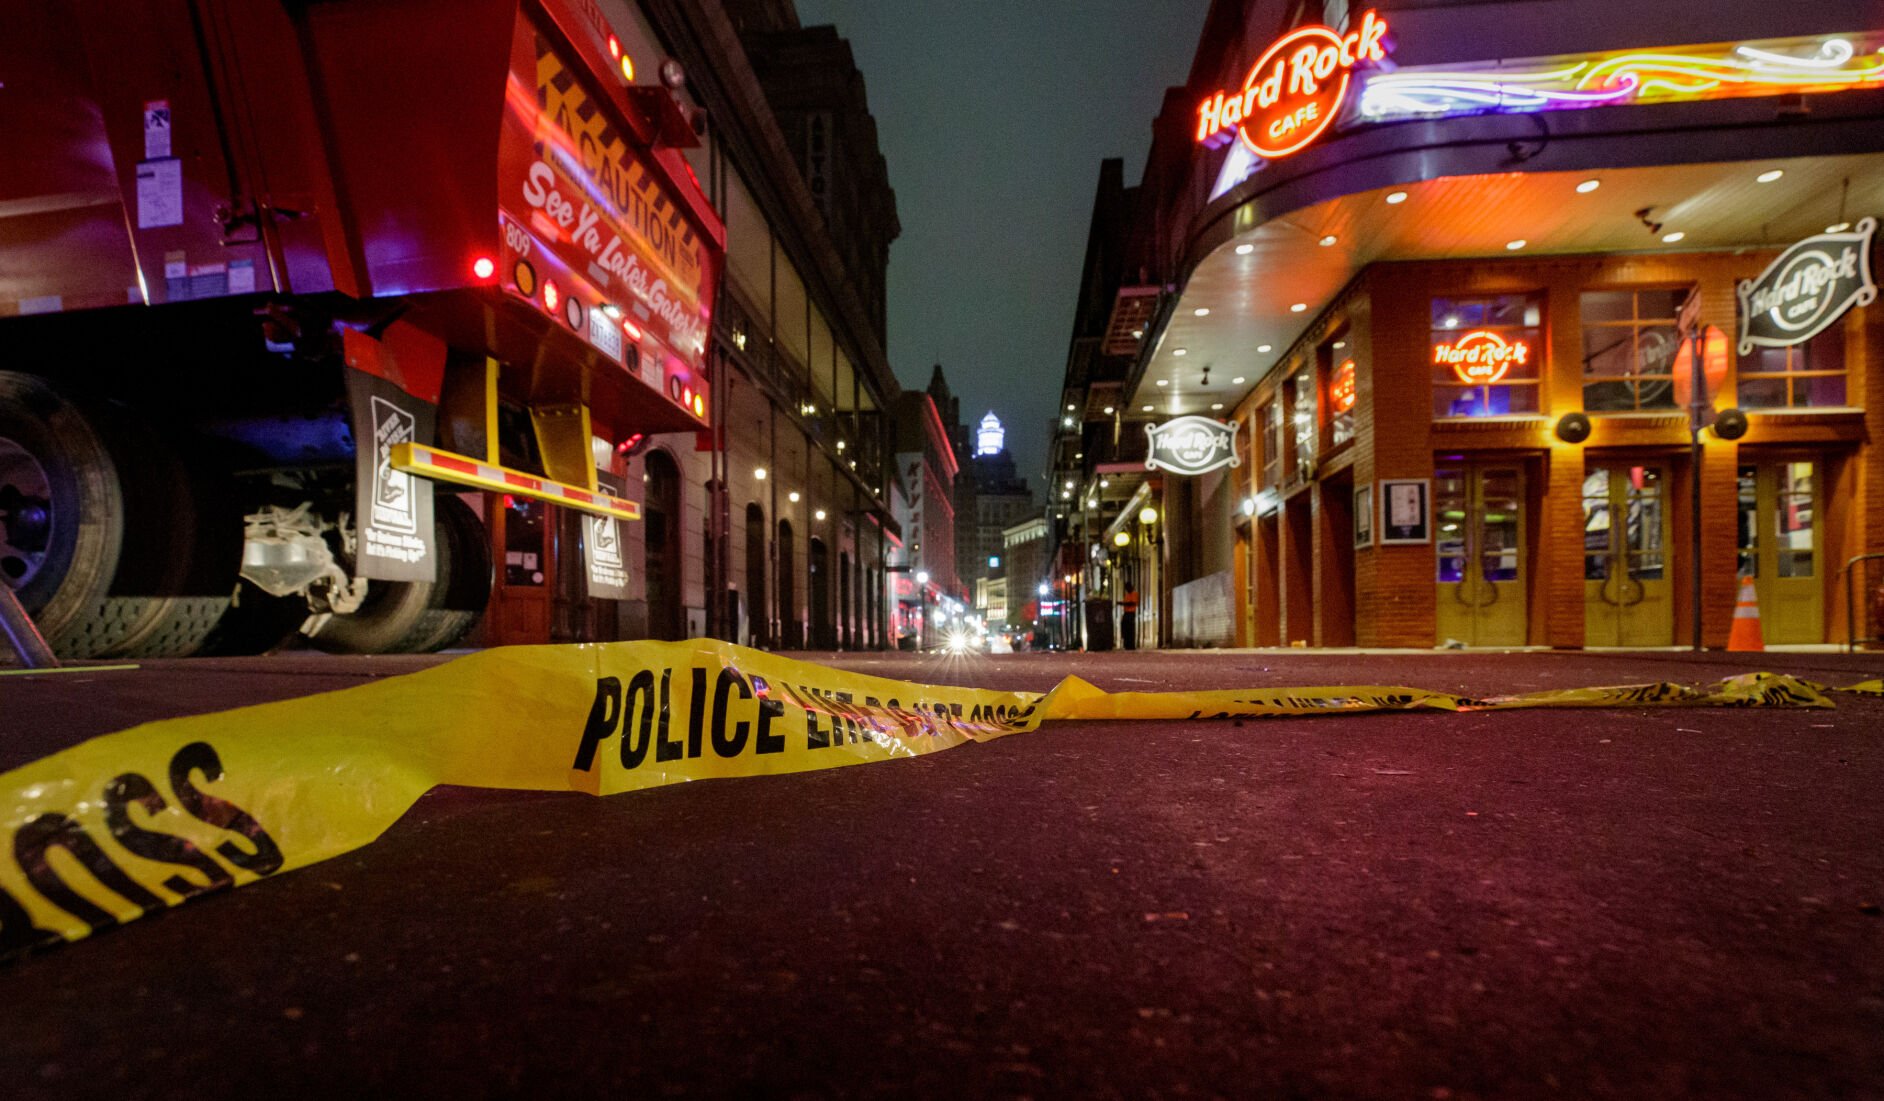 Suspect identified in Bourbon Street shooting that wounded 5 people